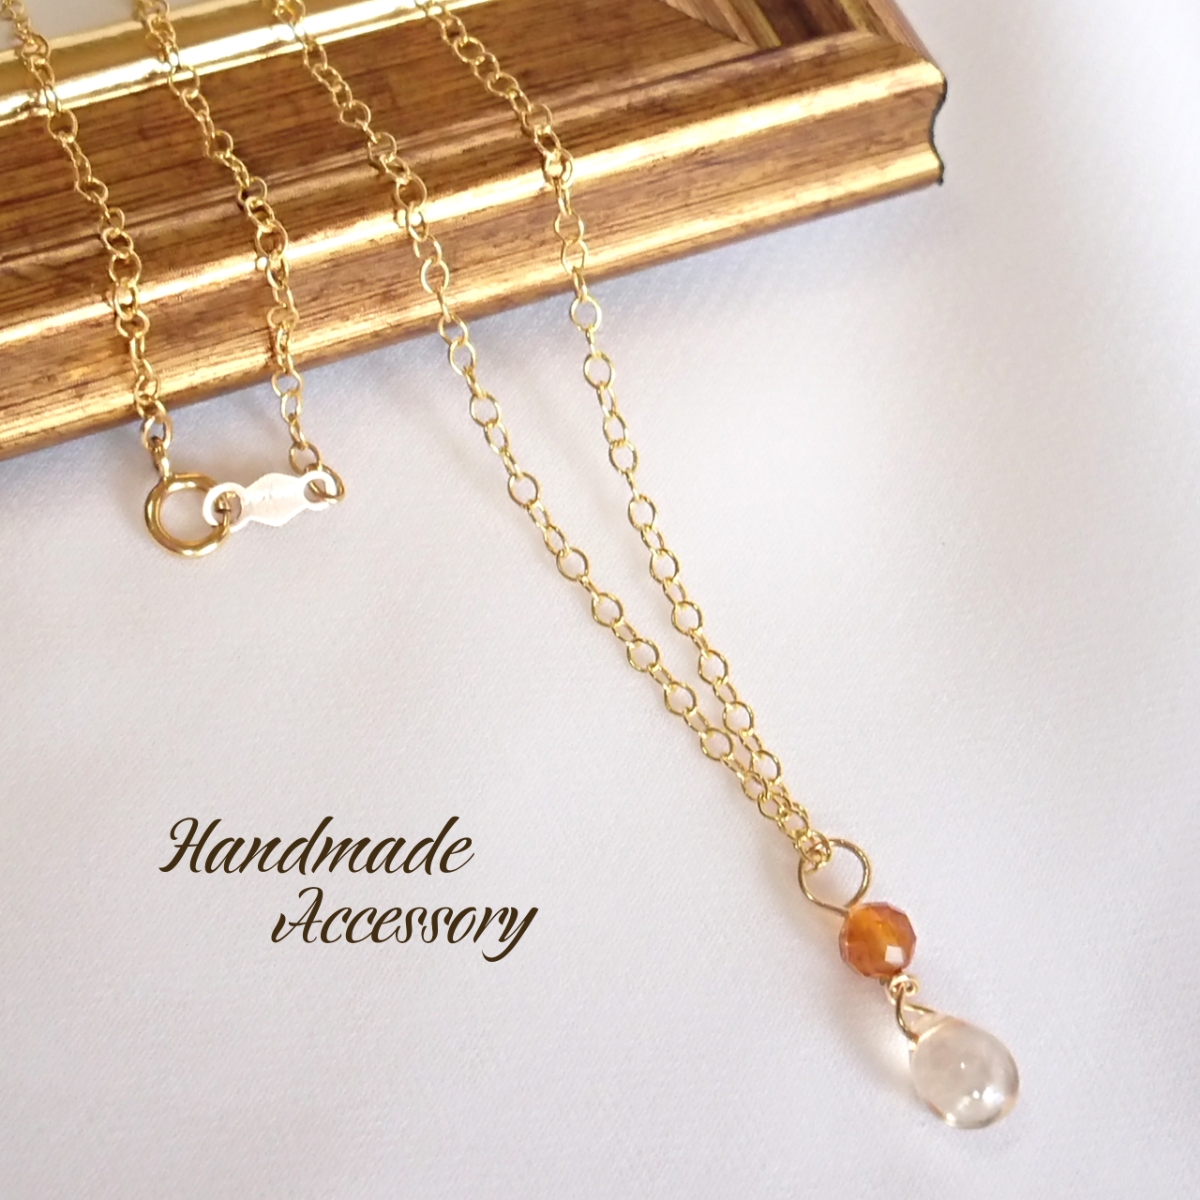 *Handmade*Natural stone*June birthstone*Petite necklace with gemstone-quality brandy citrine and Czech drop (champagne luster)**, Handmade, Accessories (for women), necklace, pendant, choker